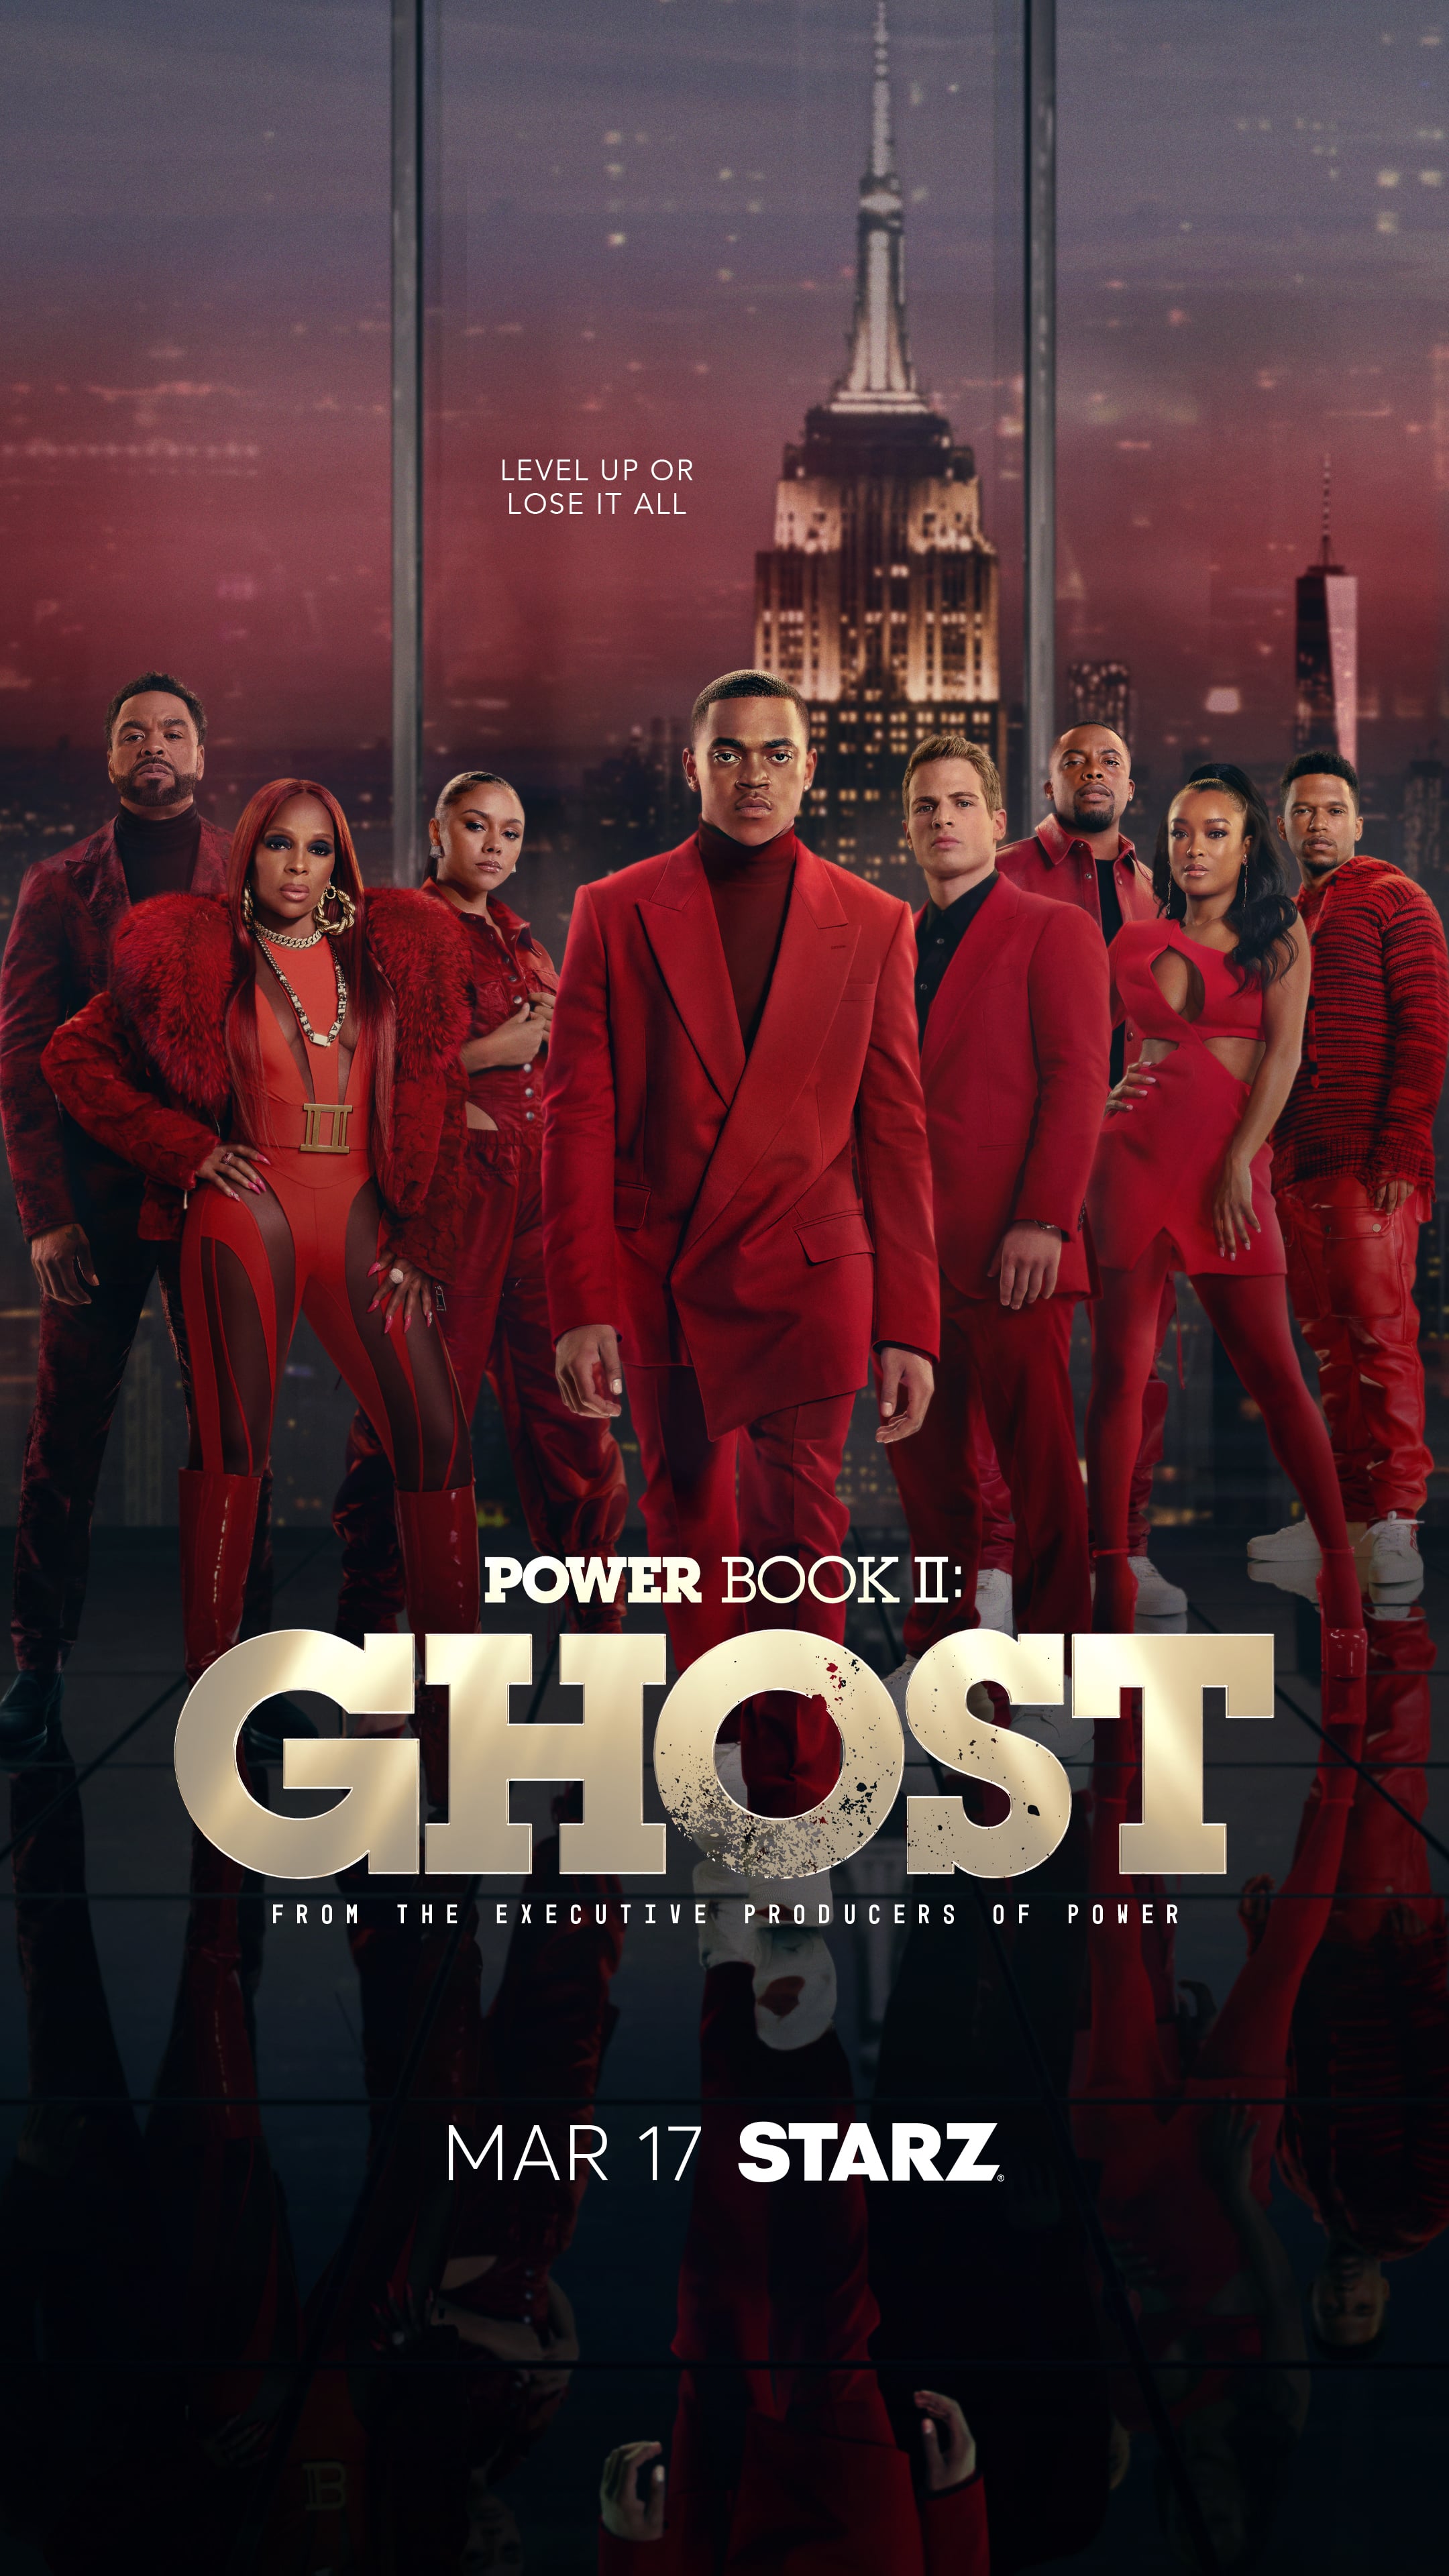 Power Book II: Ghost season 3 images tease what's to come ahead of premiere